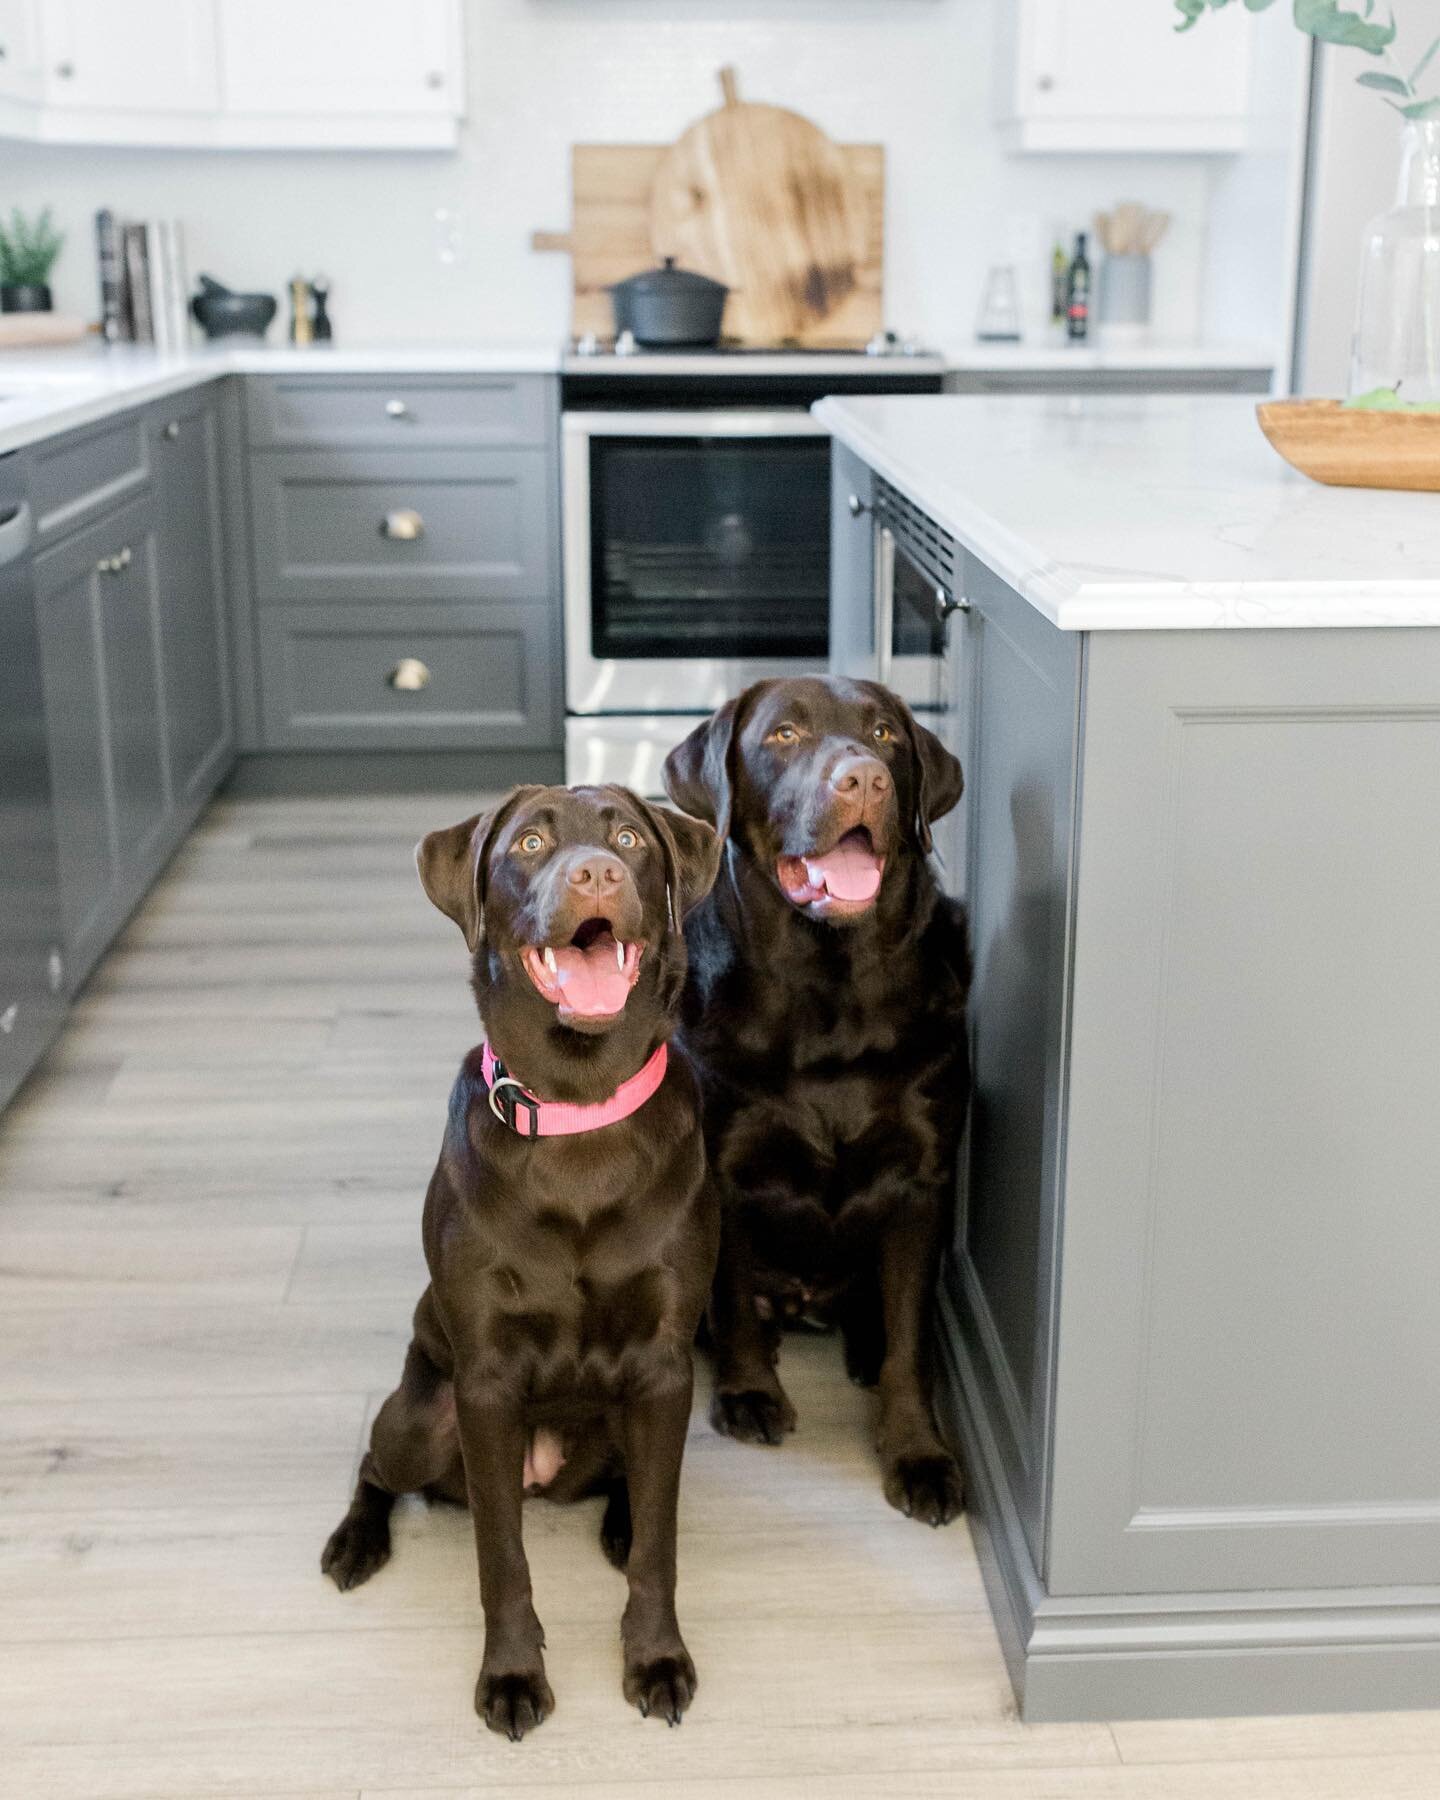 If you don&rsquo;t already know these are my two babies! If you&rsquo;re a dog parent I&rsquo;m sure you can understand my obsession. For my dream home I can&rsquo;t wait to include custom elements to accommodate them. I started a design for a full h